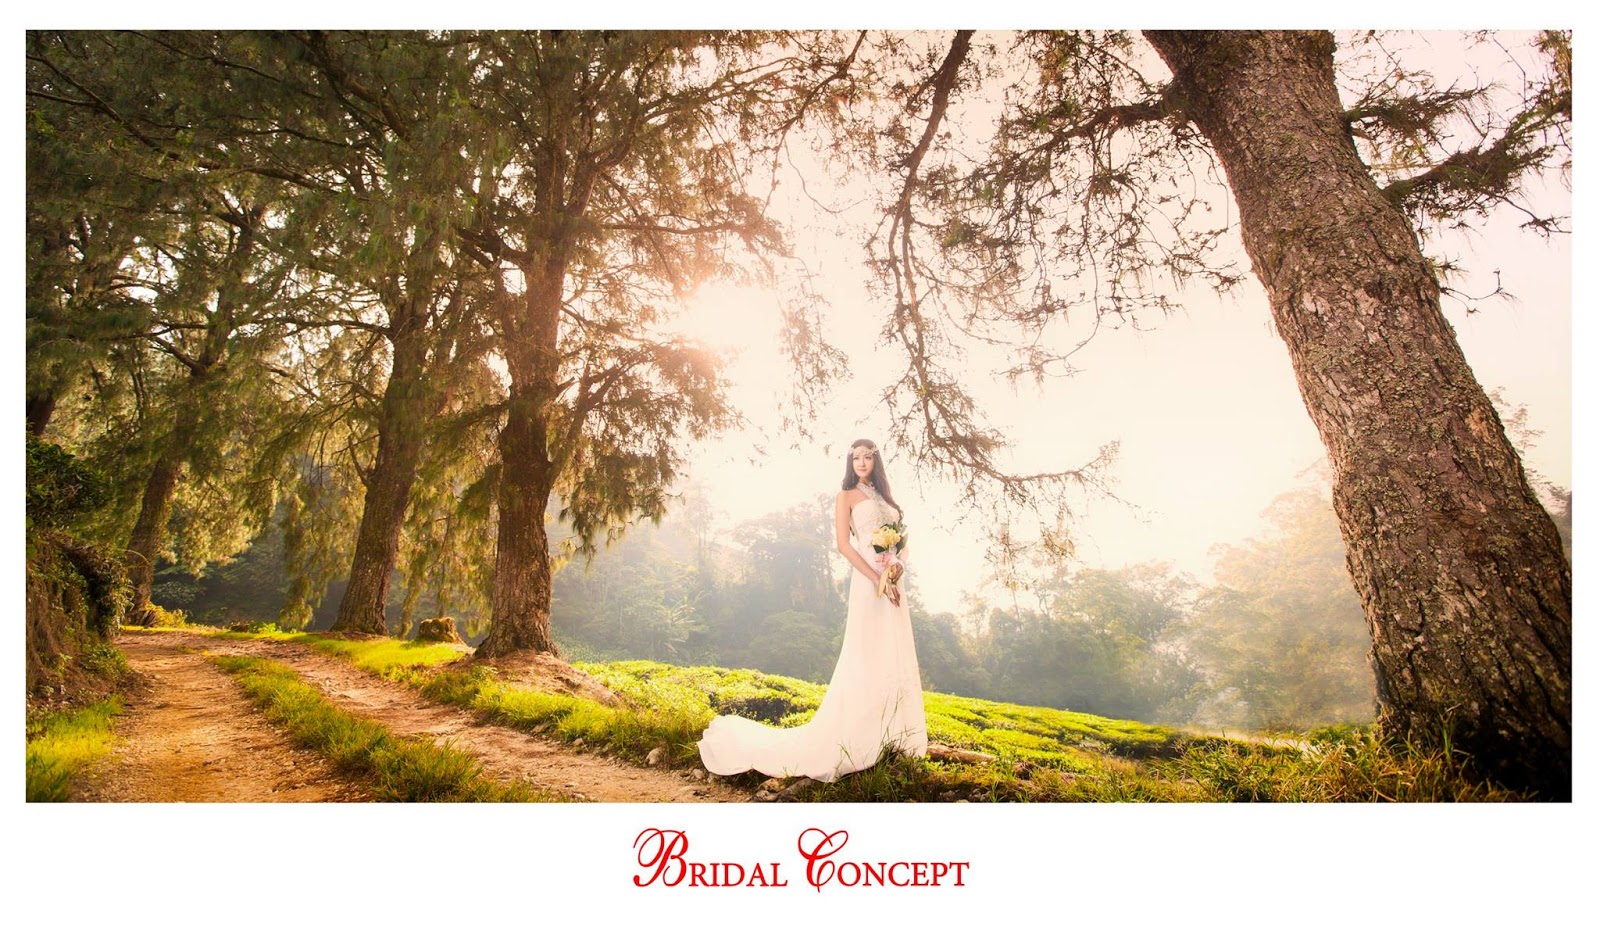 Wedding fashion photoshoot in Cameron Highlands. Photo by Bridal Concept